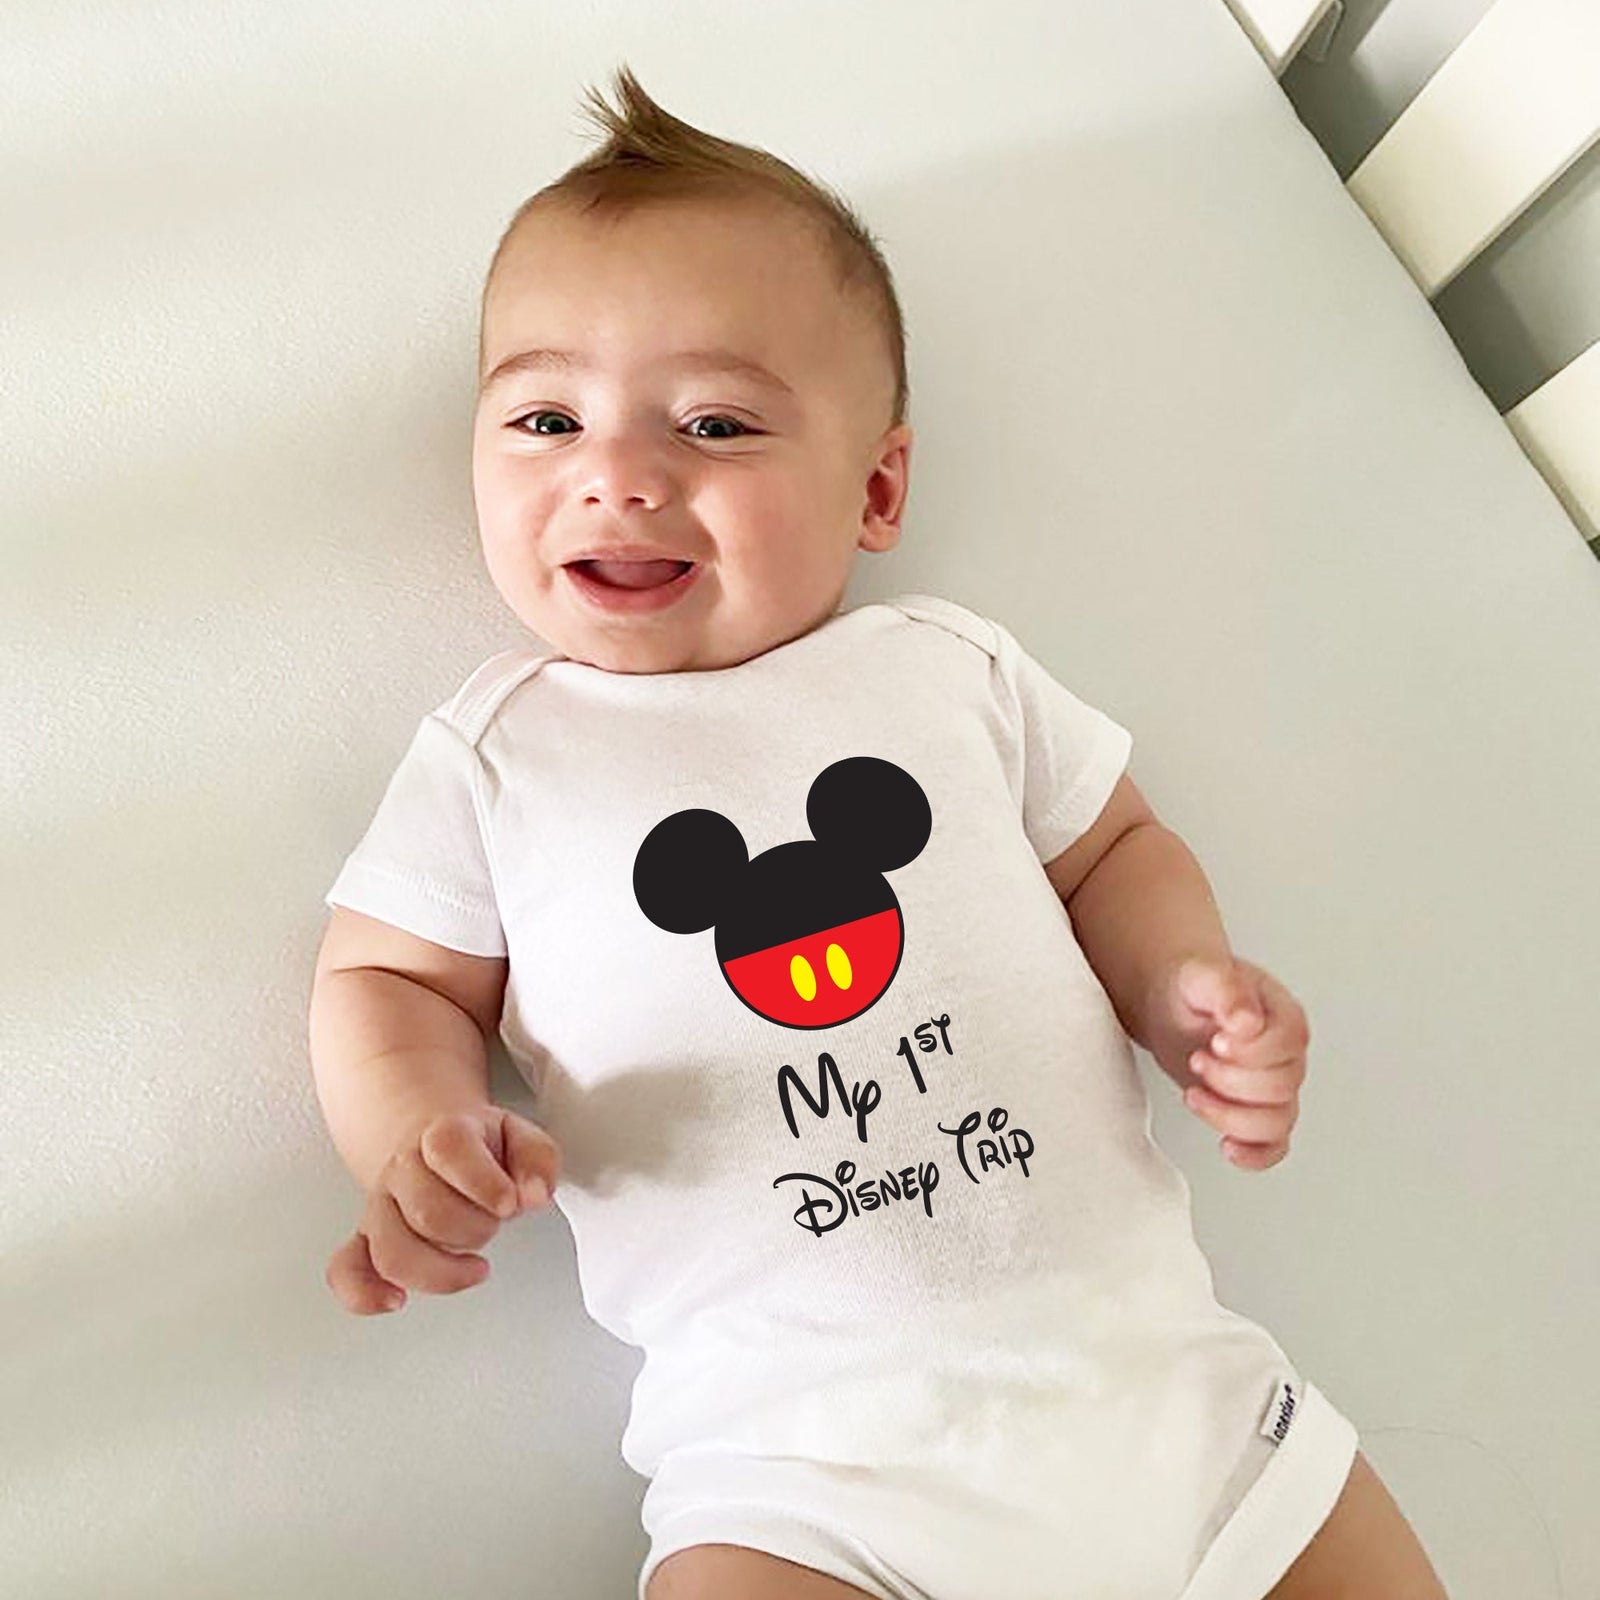 My First Disney Trip Shirt - Baby Mickey Mouse Pants -  Infant Onesie - 1st Time Visit